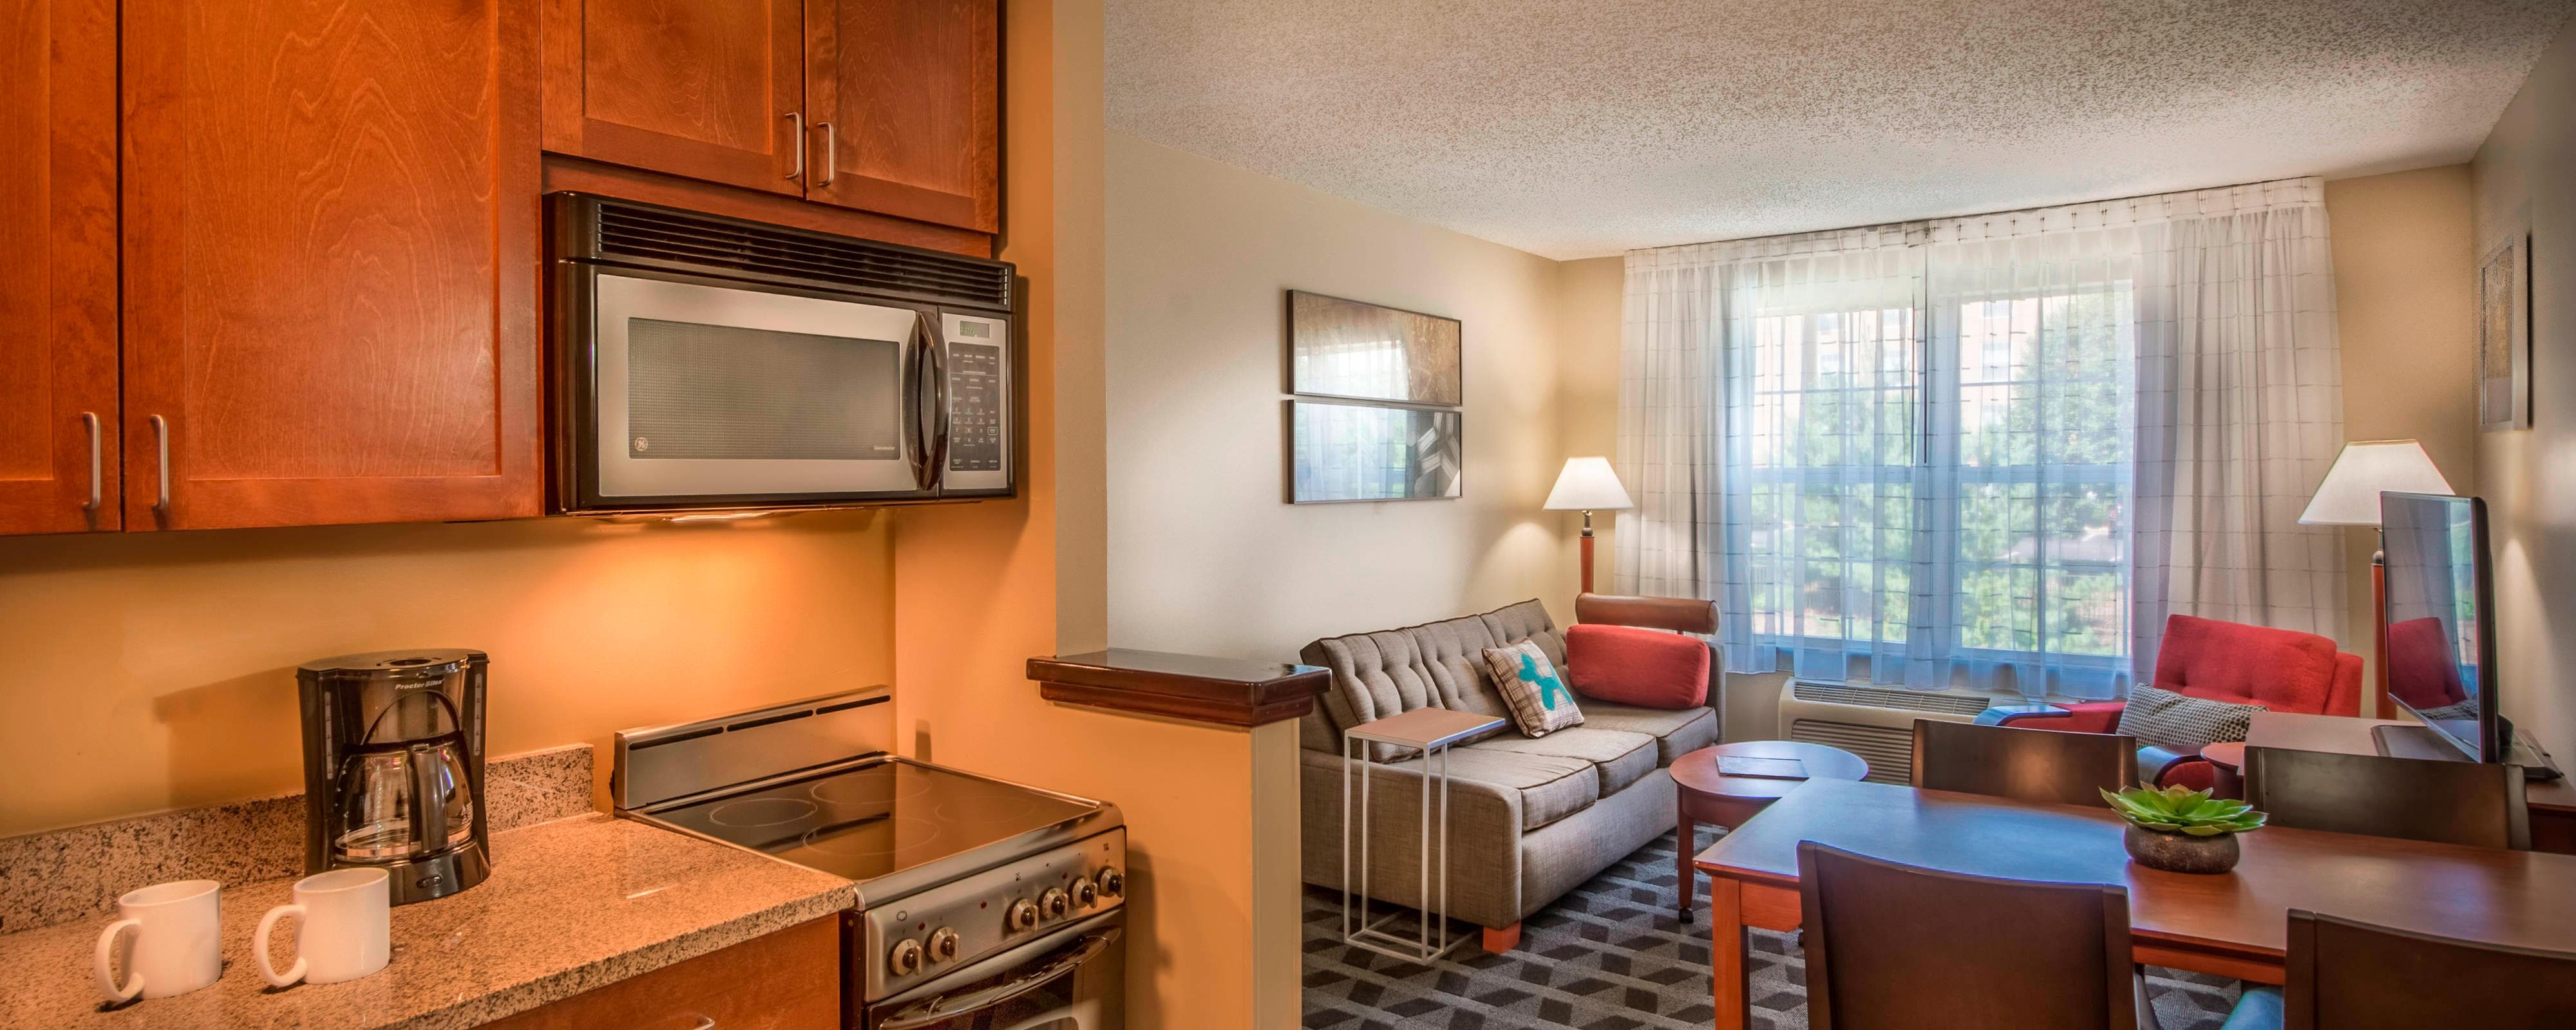 Linthicum Maryland Hotels Near Bwi Towneplace Suites Baltimore